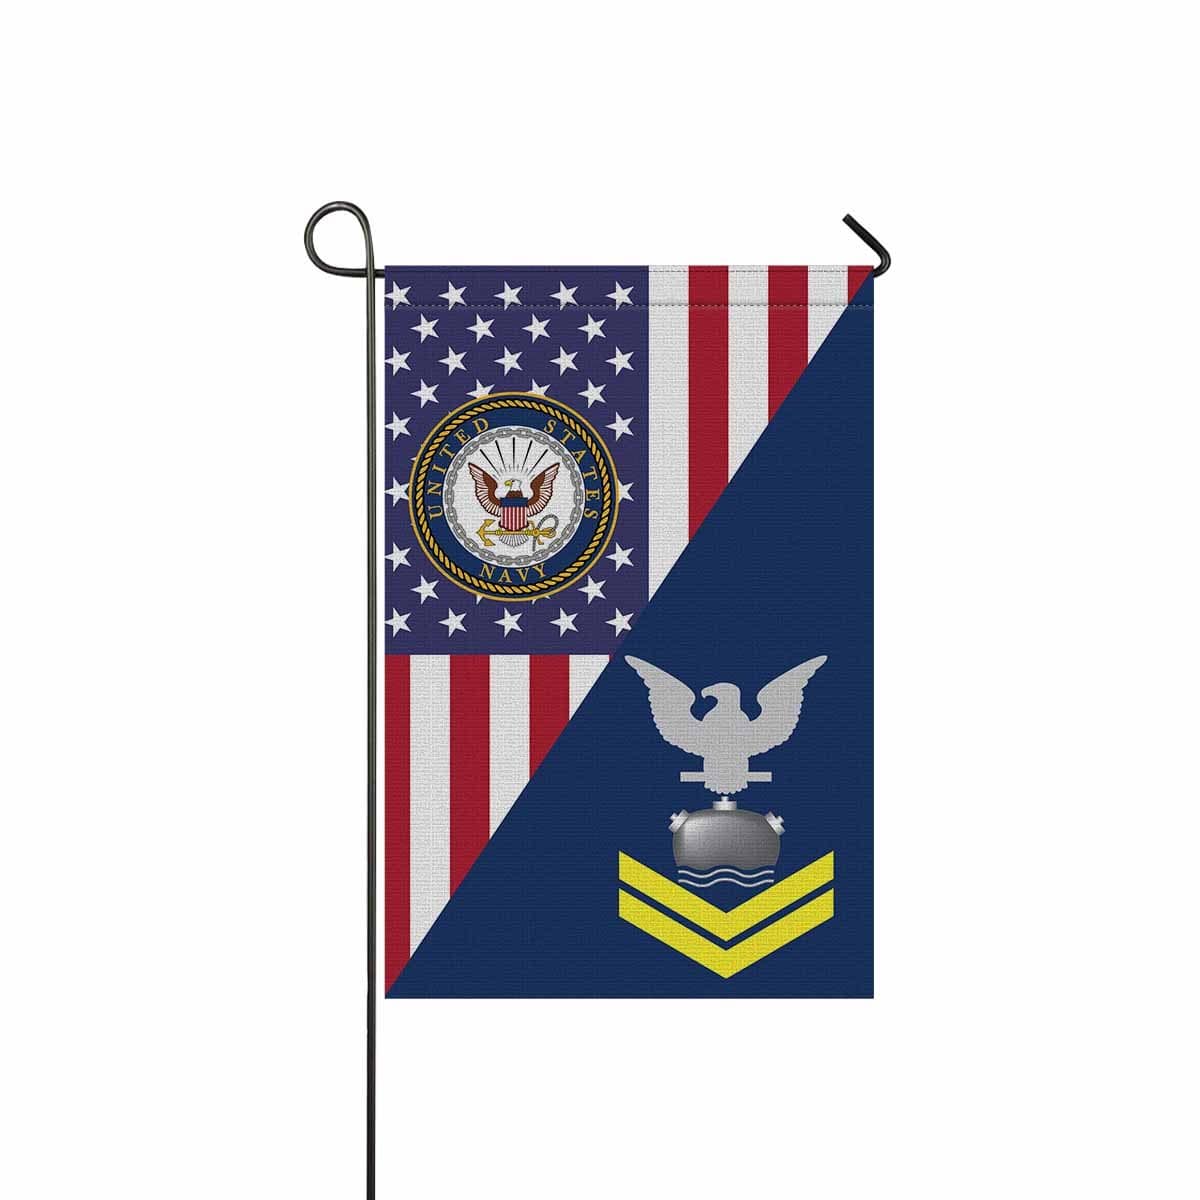 Navy Mineman Navy MN E-5 Gold Stripe Garden Flag/Yard Flag 12 inches x 18 inches Twin-Side Printing-GDFlag-Navy-Rating-Veterans Nation